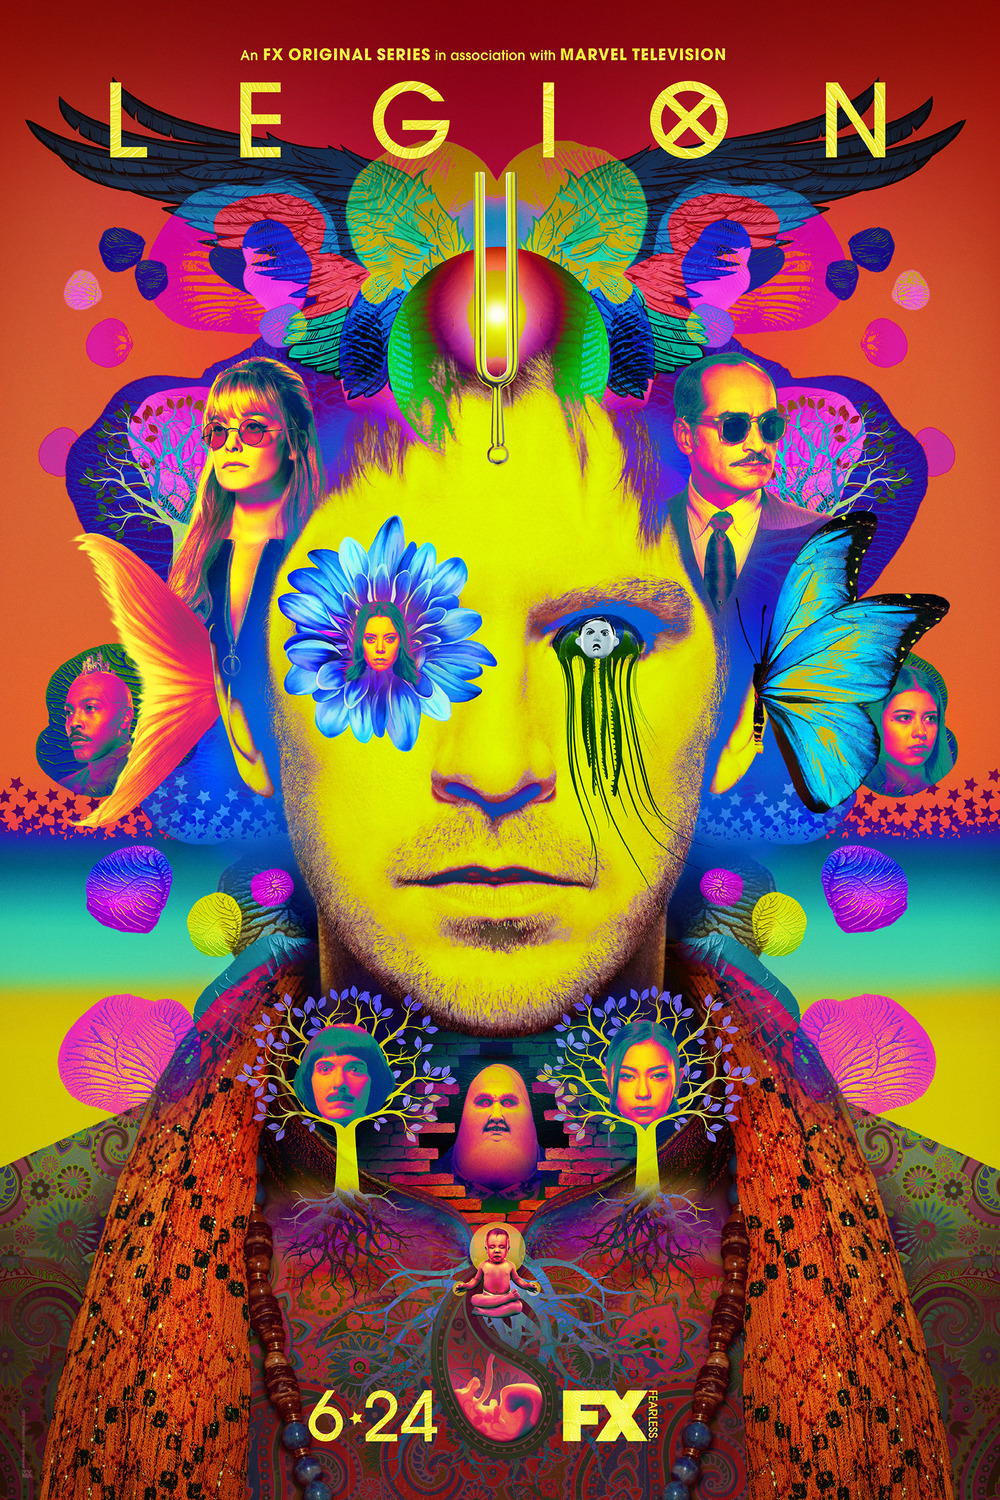 Extra Large TV Poster Image for Legion (#9 of 16)